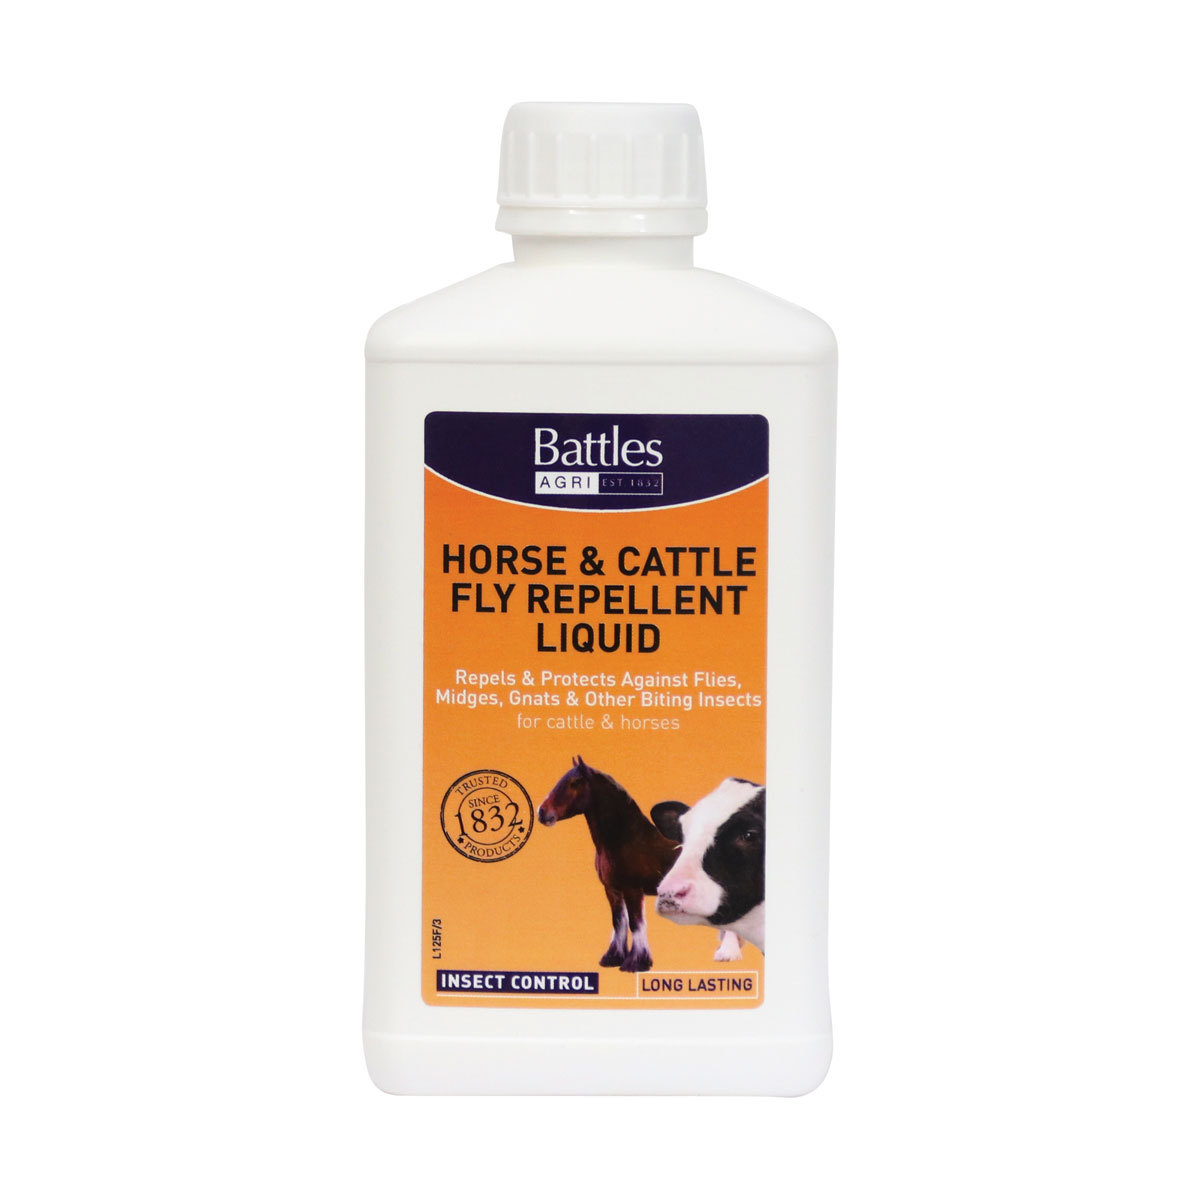 Battles Horse & Cattle Fly Repellant